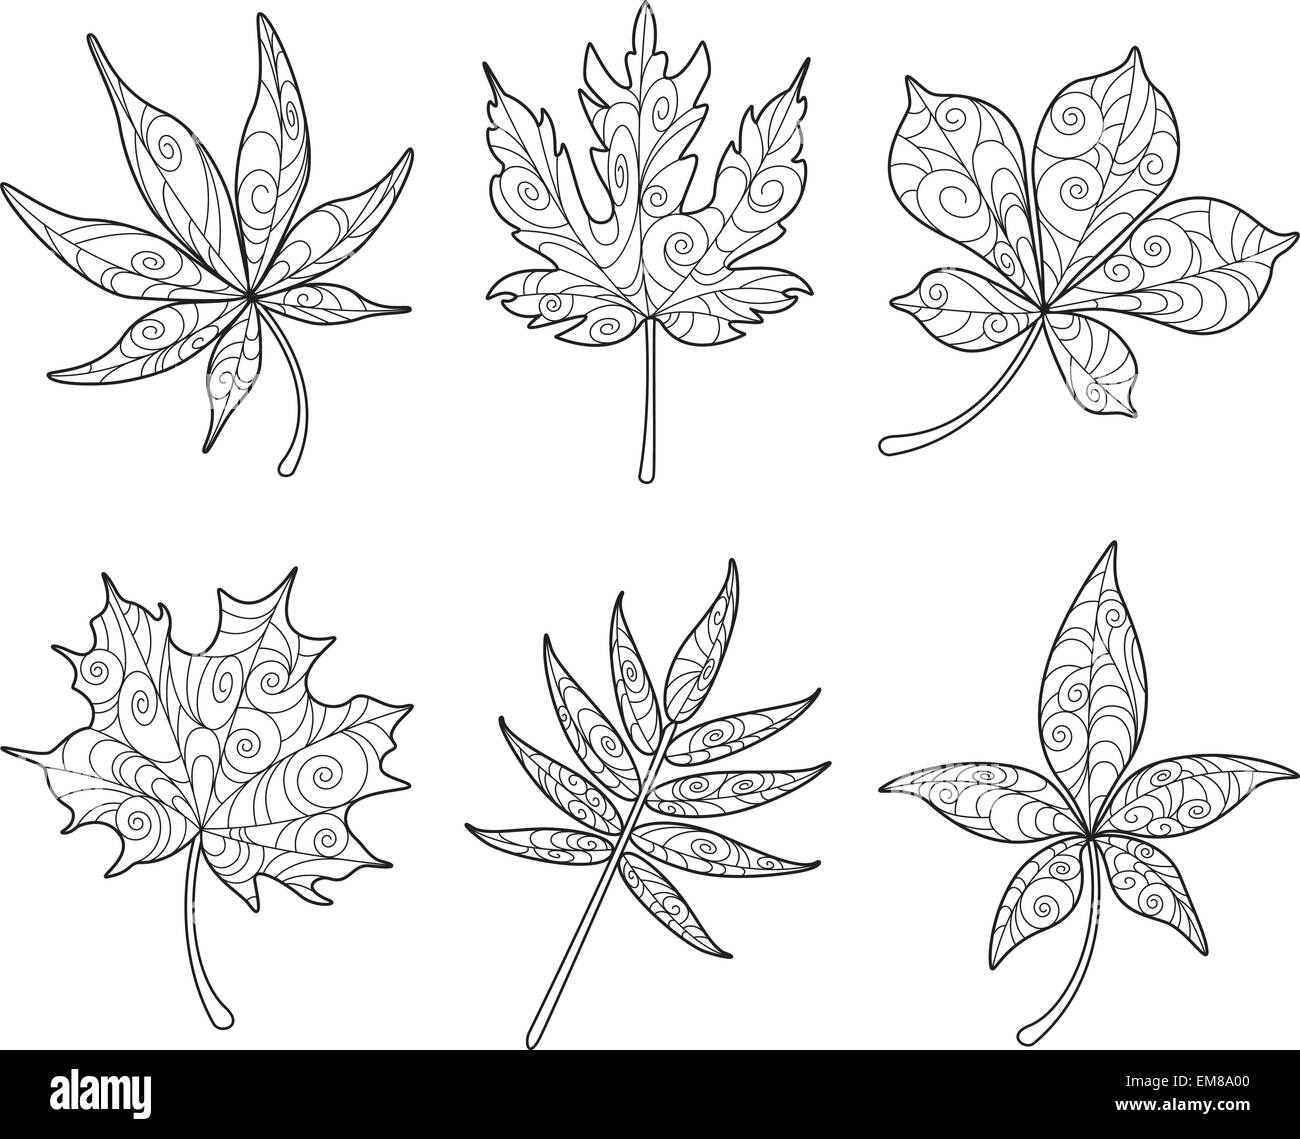 Patterned Maple Leaves in black and white Stock Vector